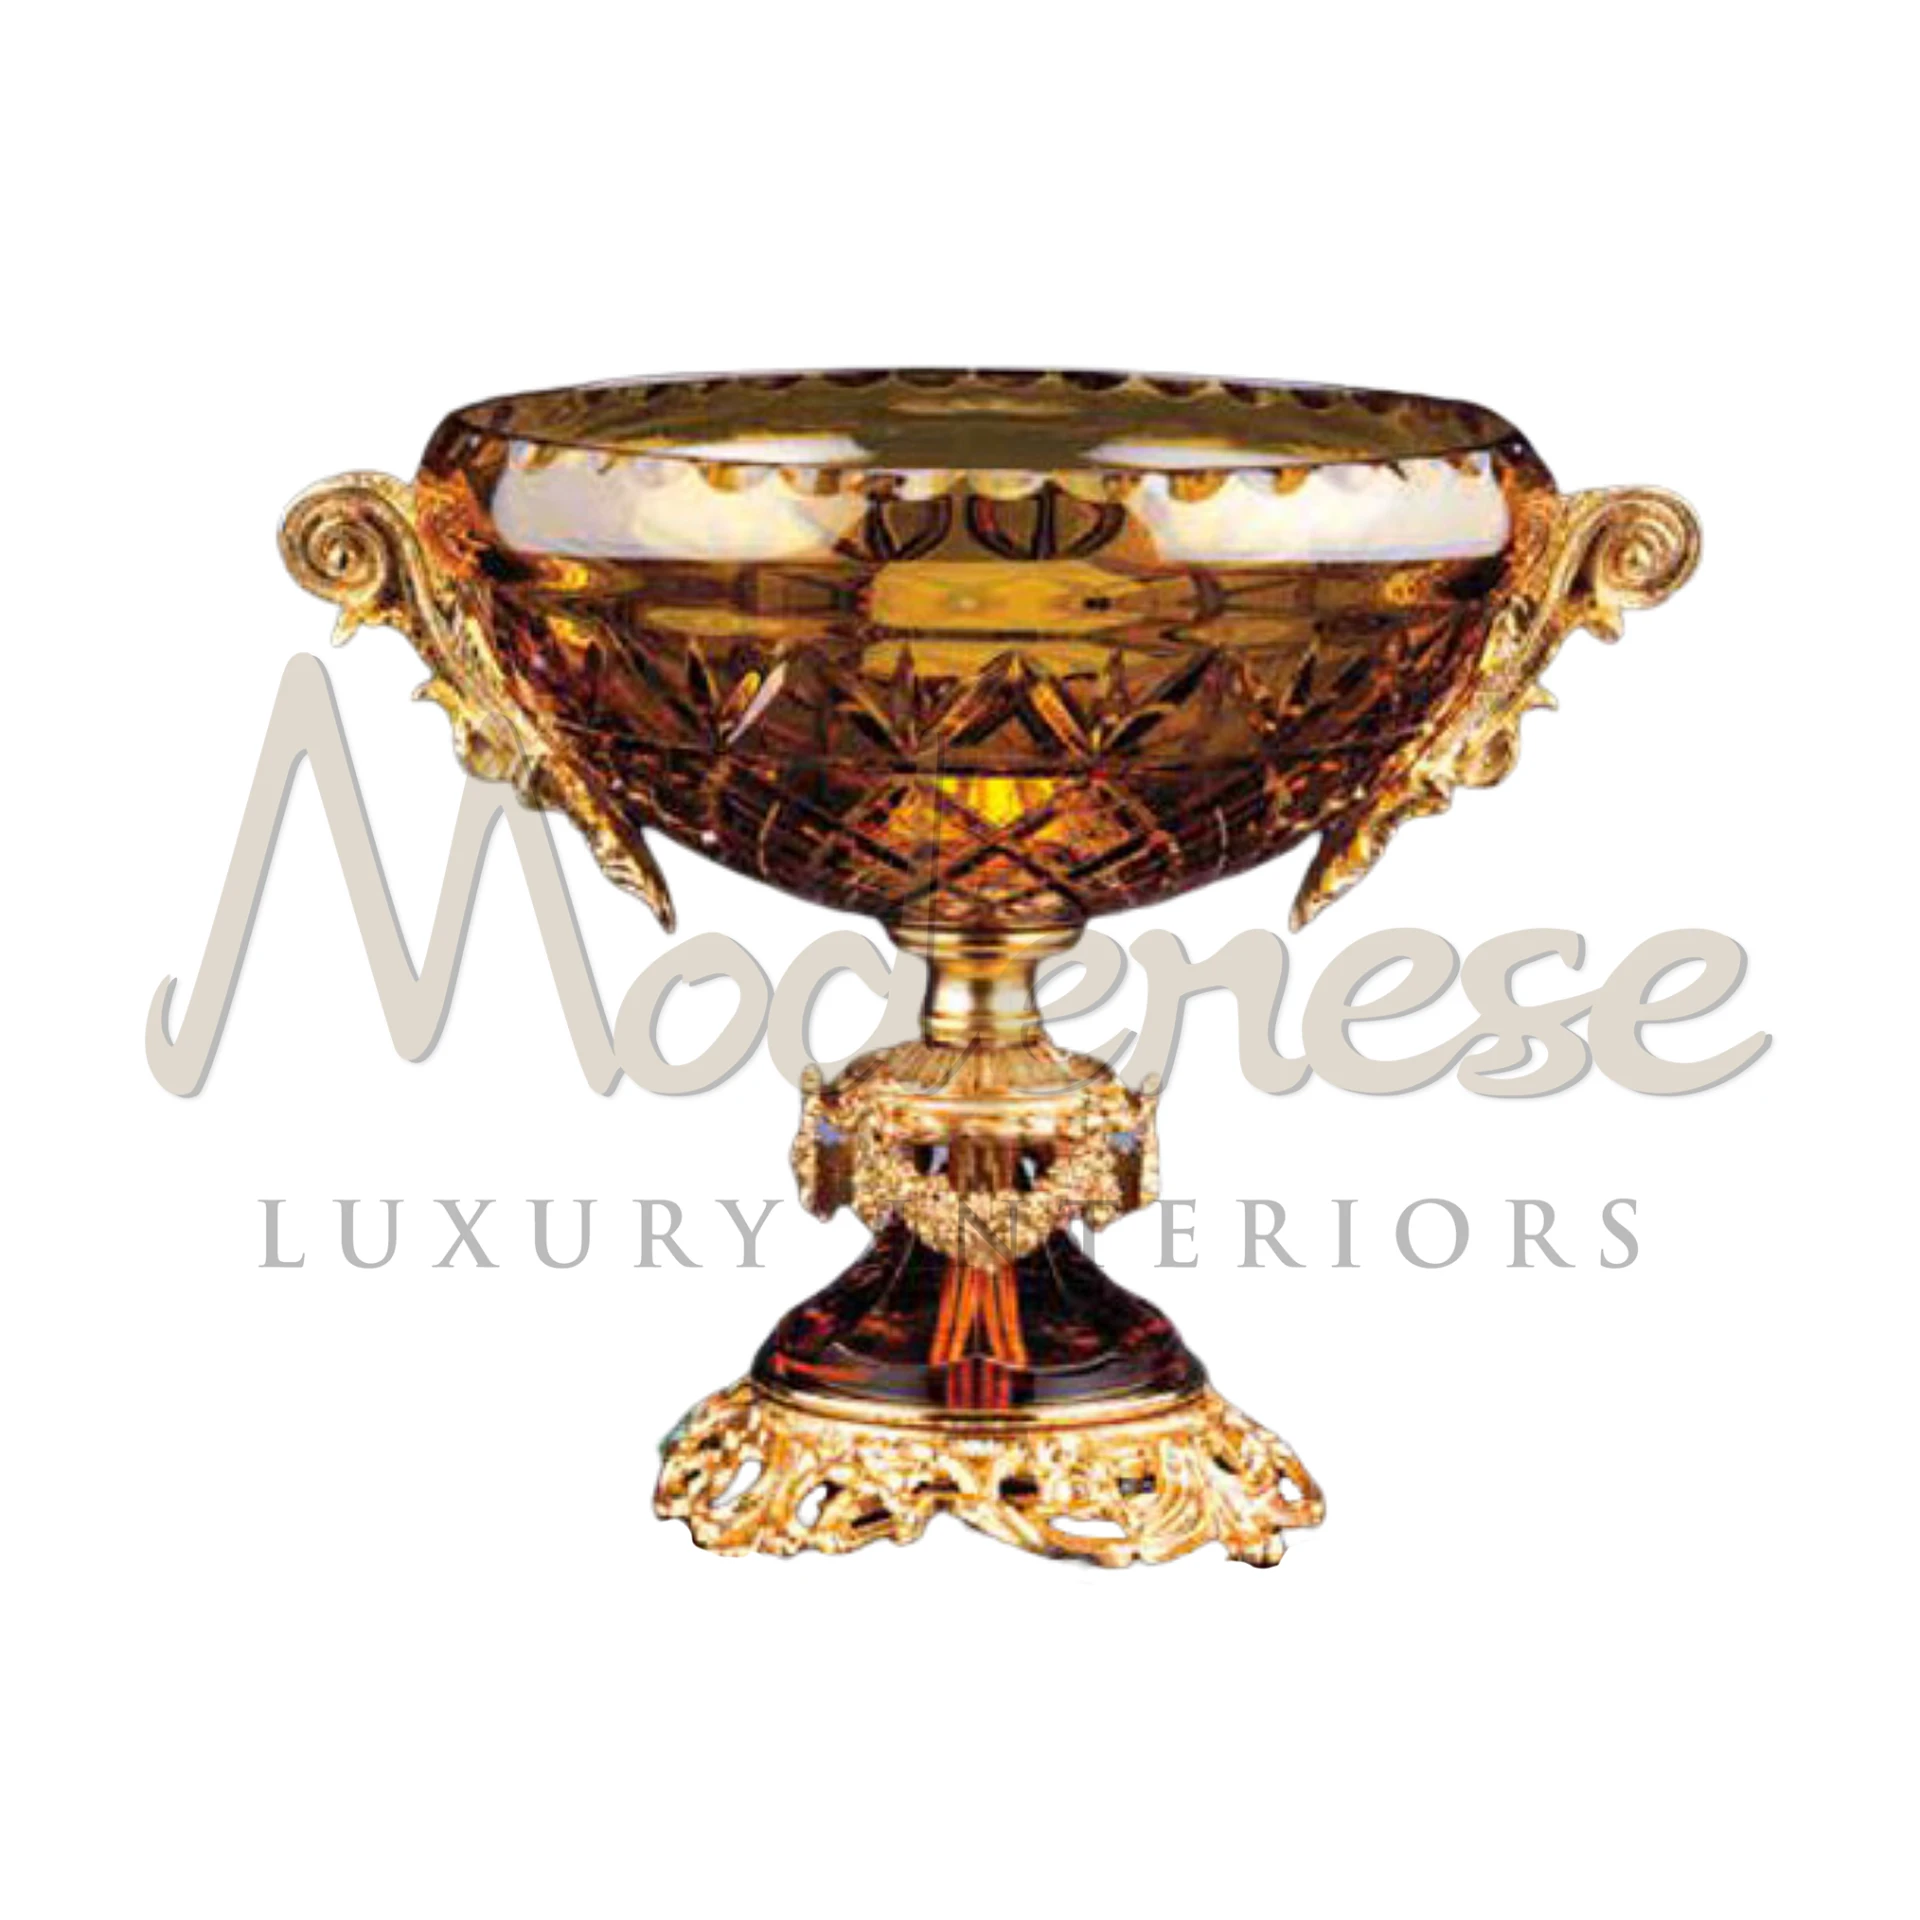 Traditional luxury glass bowl with unique designs and textures, perfect for elegant interior design and sophisticated serving.







